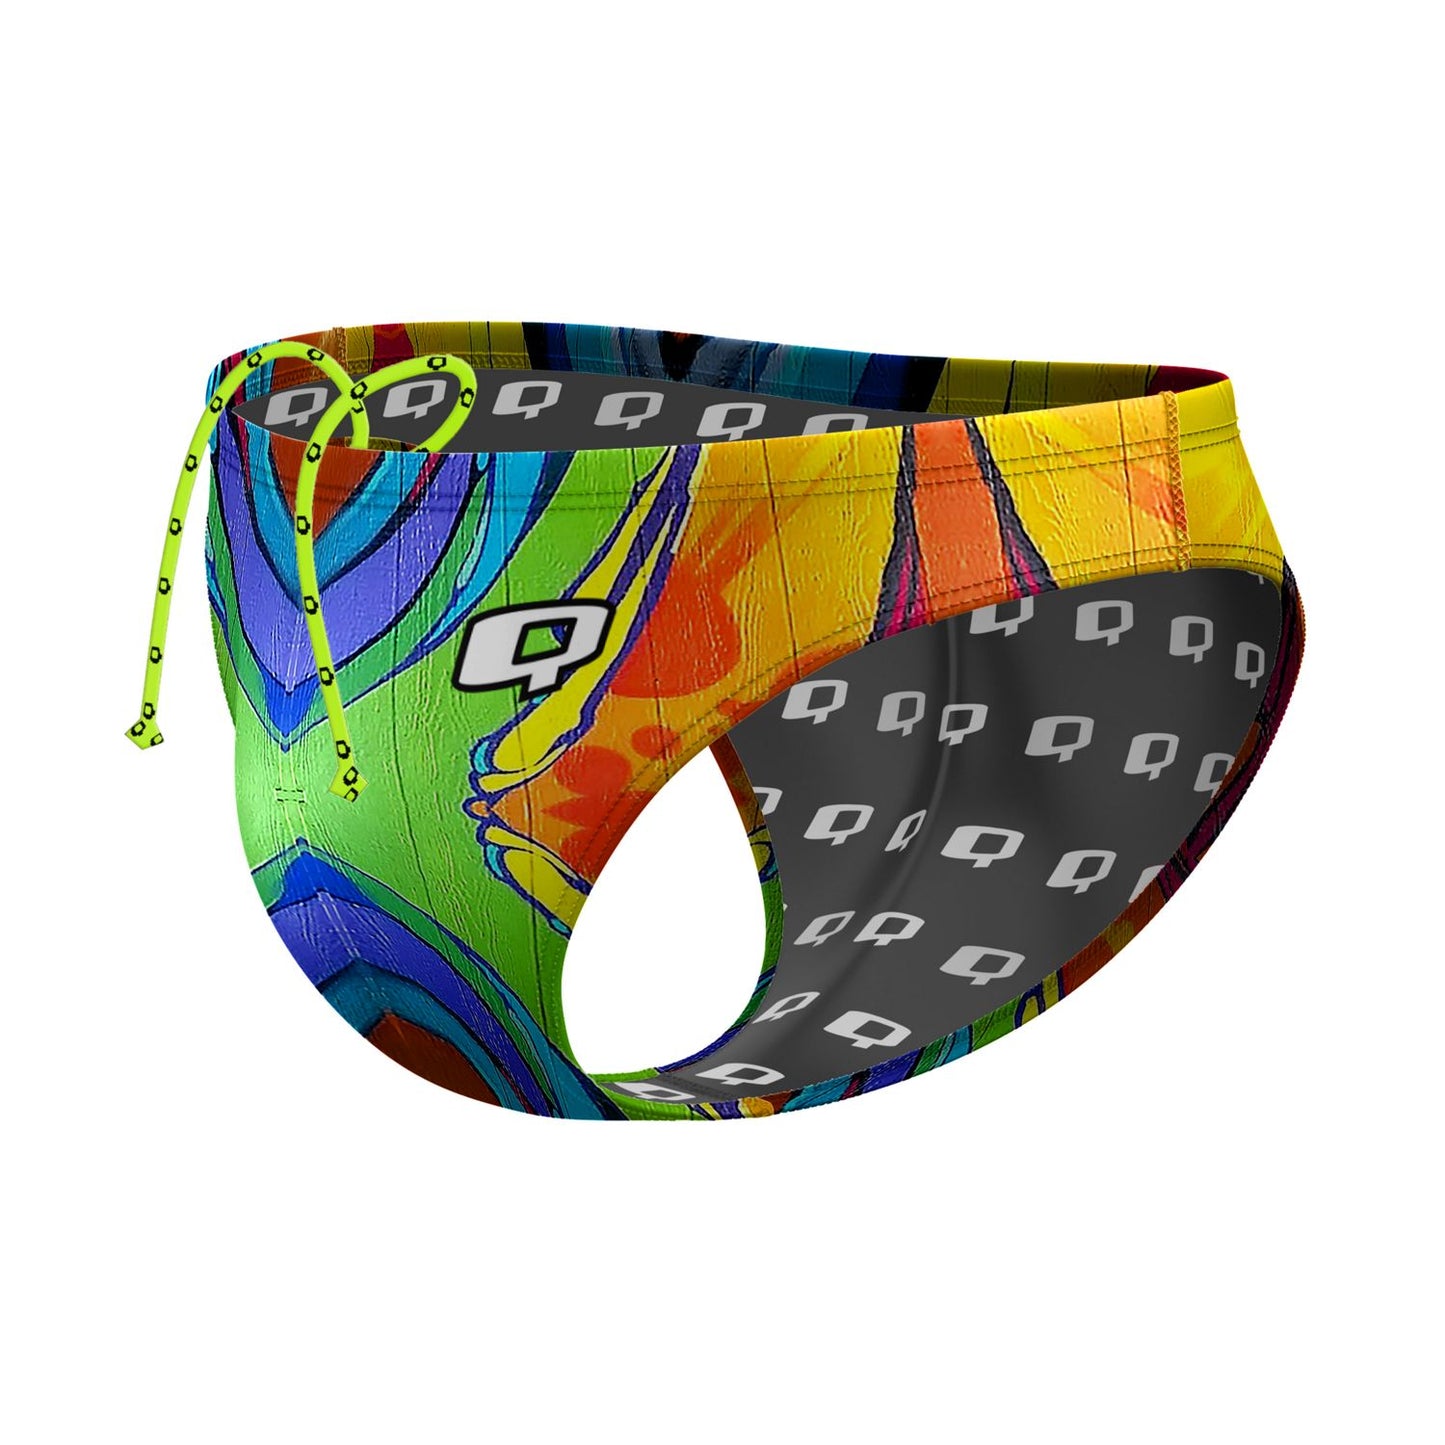 Lucid 2 Waterpolo Brief